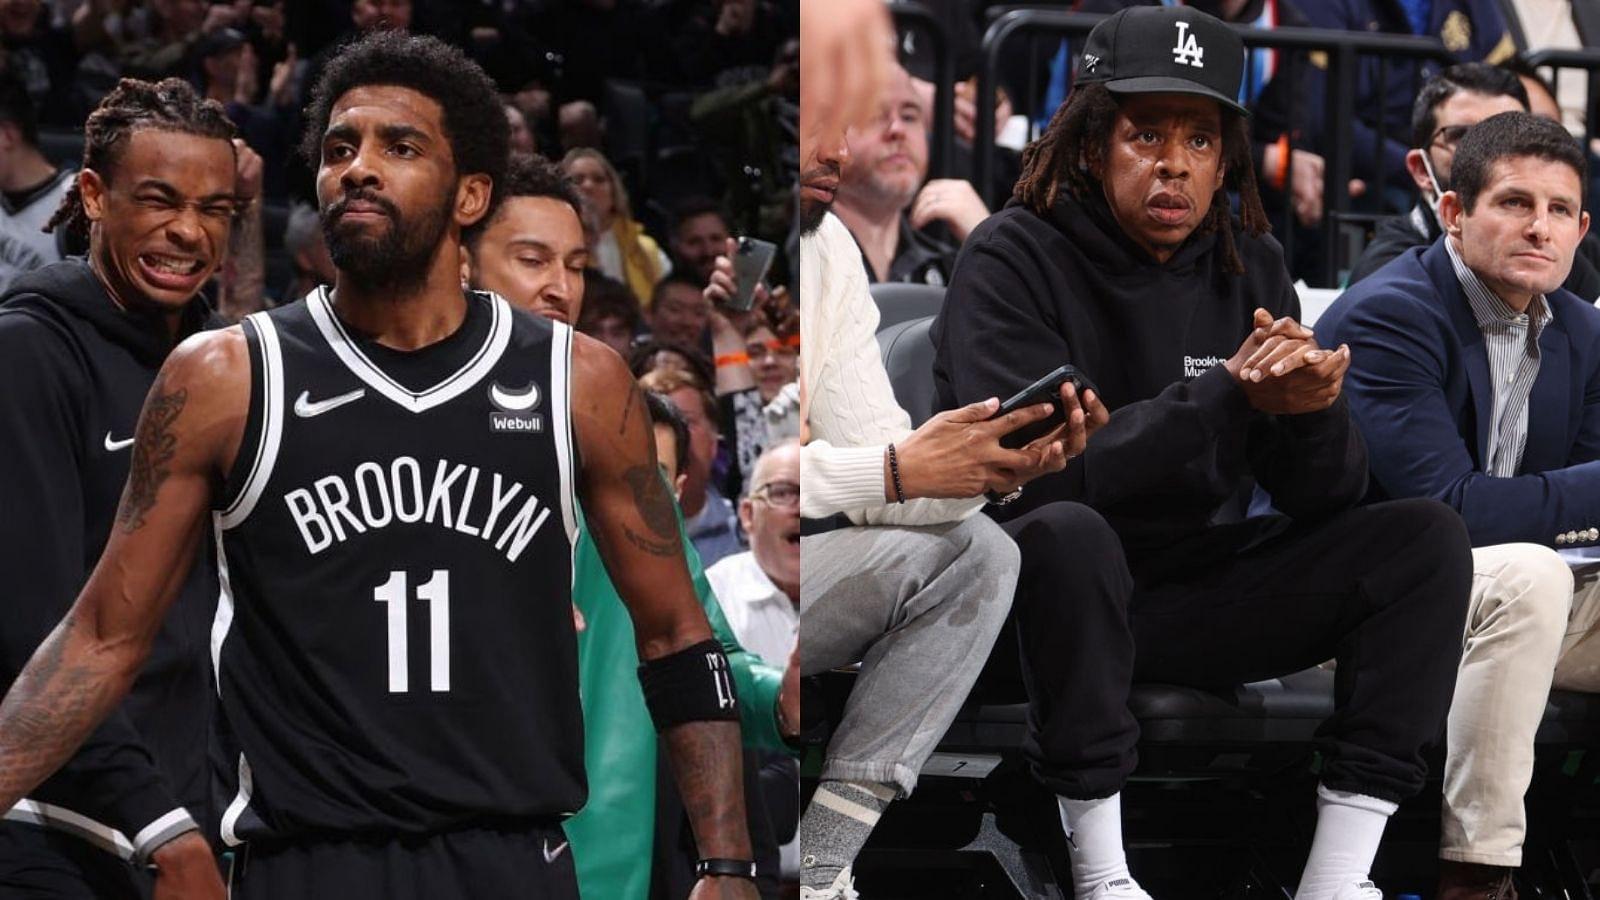 "Kyrie Irving out here rockin the Cavaliers world AGAIN": Nets point guard goes berserk against his former team, puts fans including Jay-Z in awe